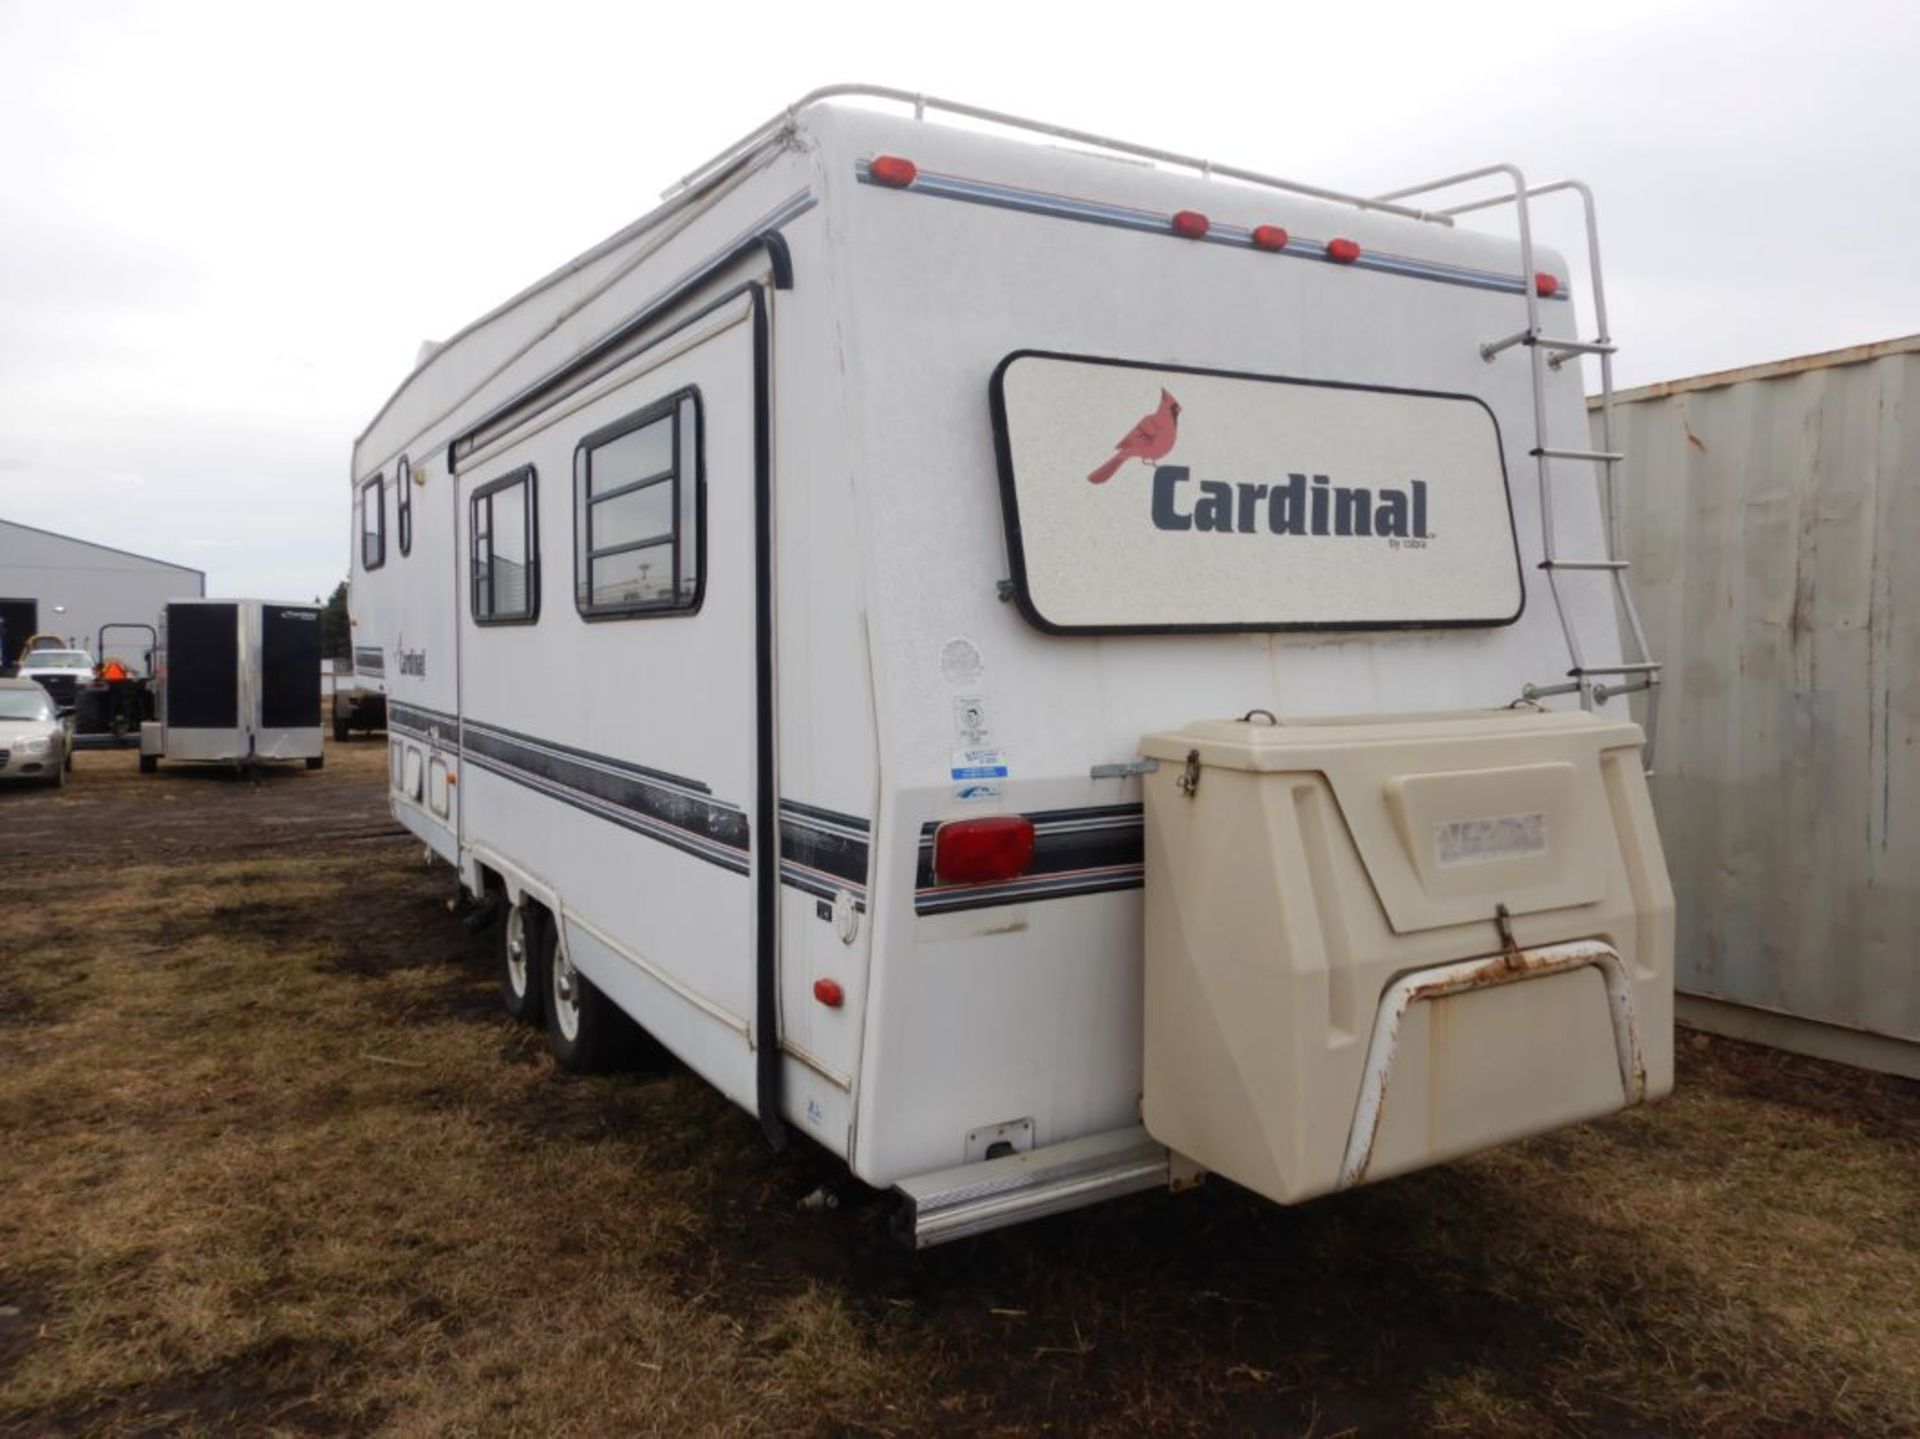 1995 CARDINAL BY COBRA 28' 5W HOLIDAY TRAILER WITH S/O. NEW AWNING, NEW TIRES, NEW STEPS, AC, SLEEPS - Image 4 of 15